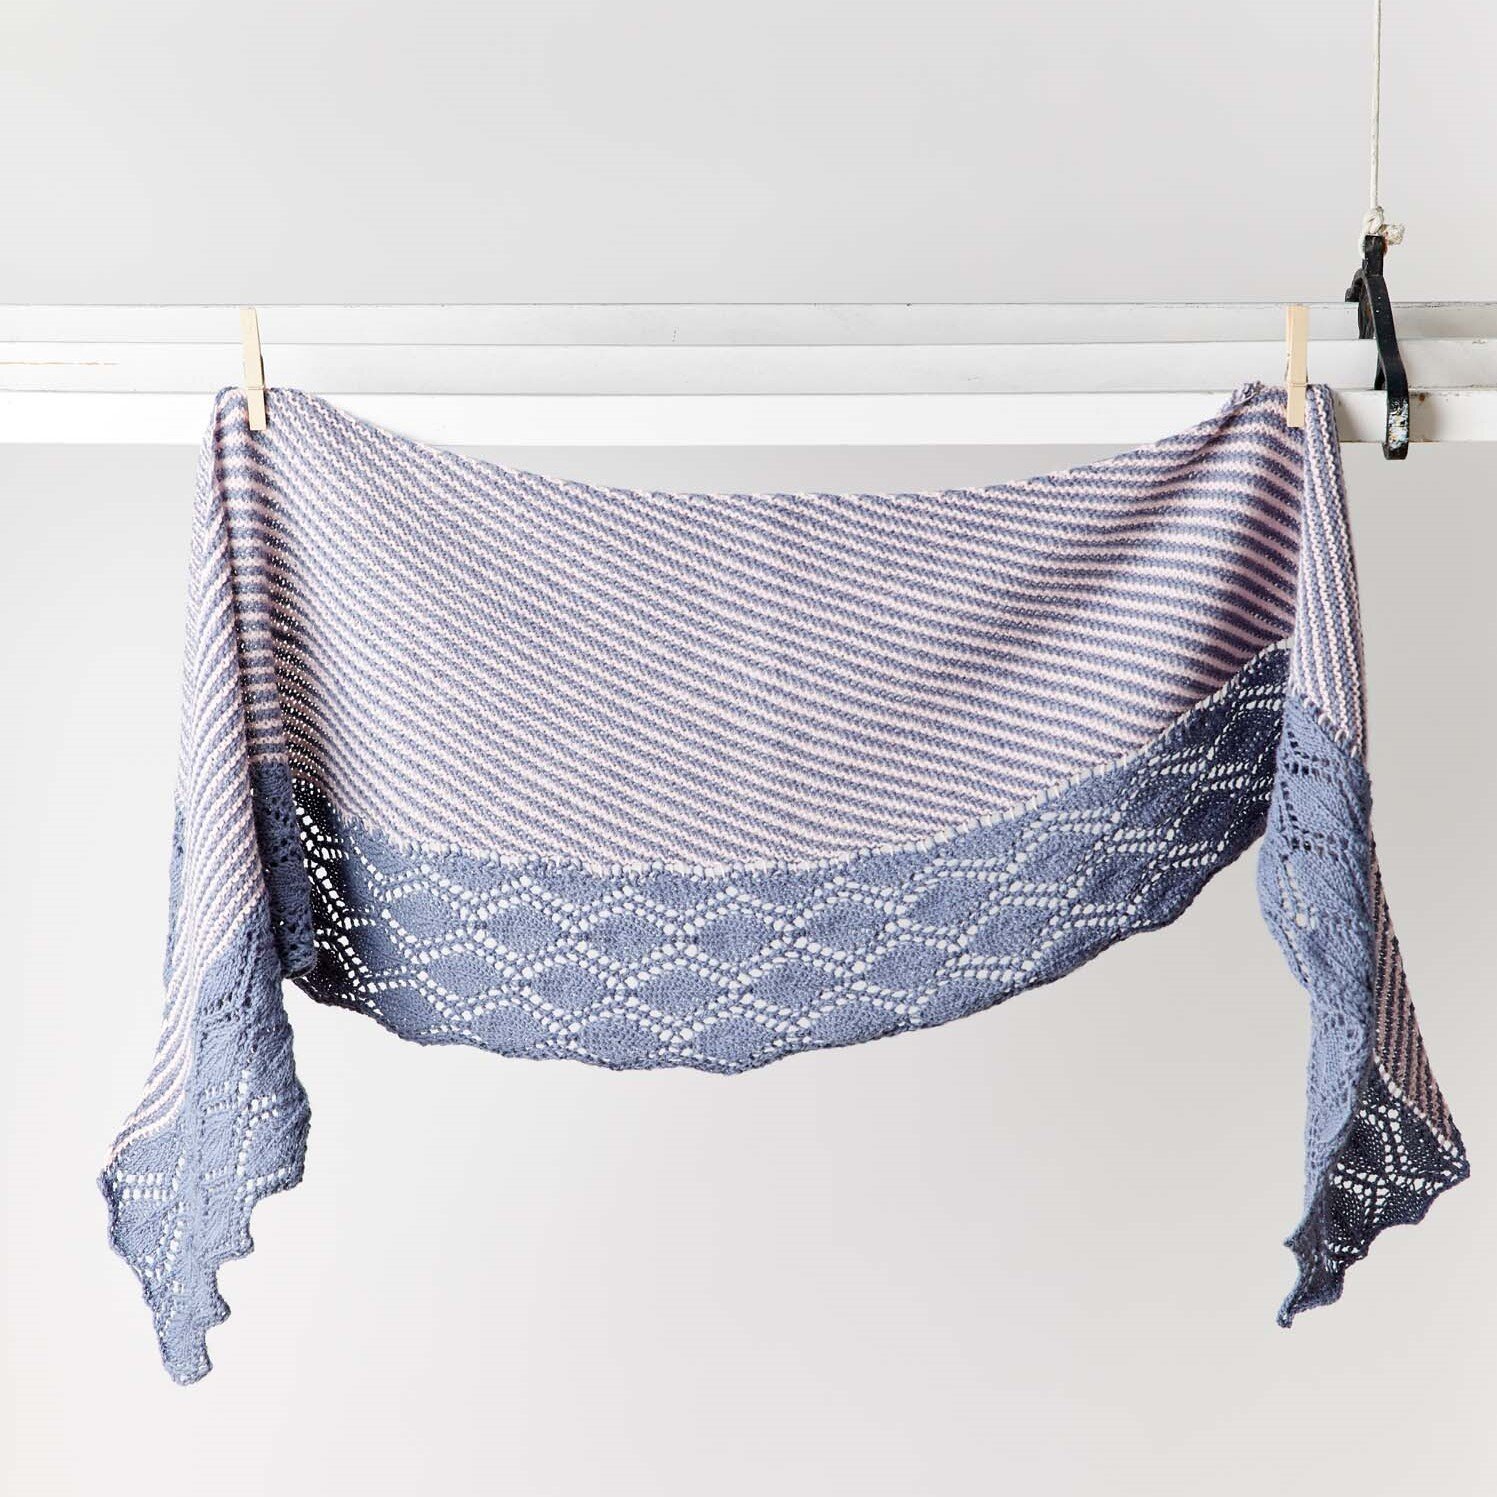 Nissolia Shawl from Something New to Learn About Lace 